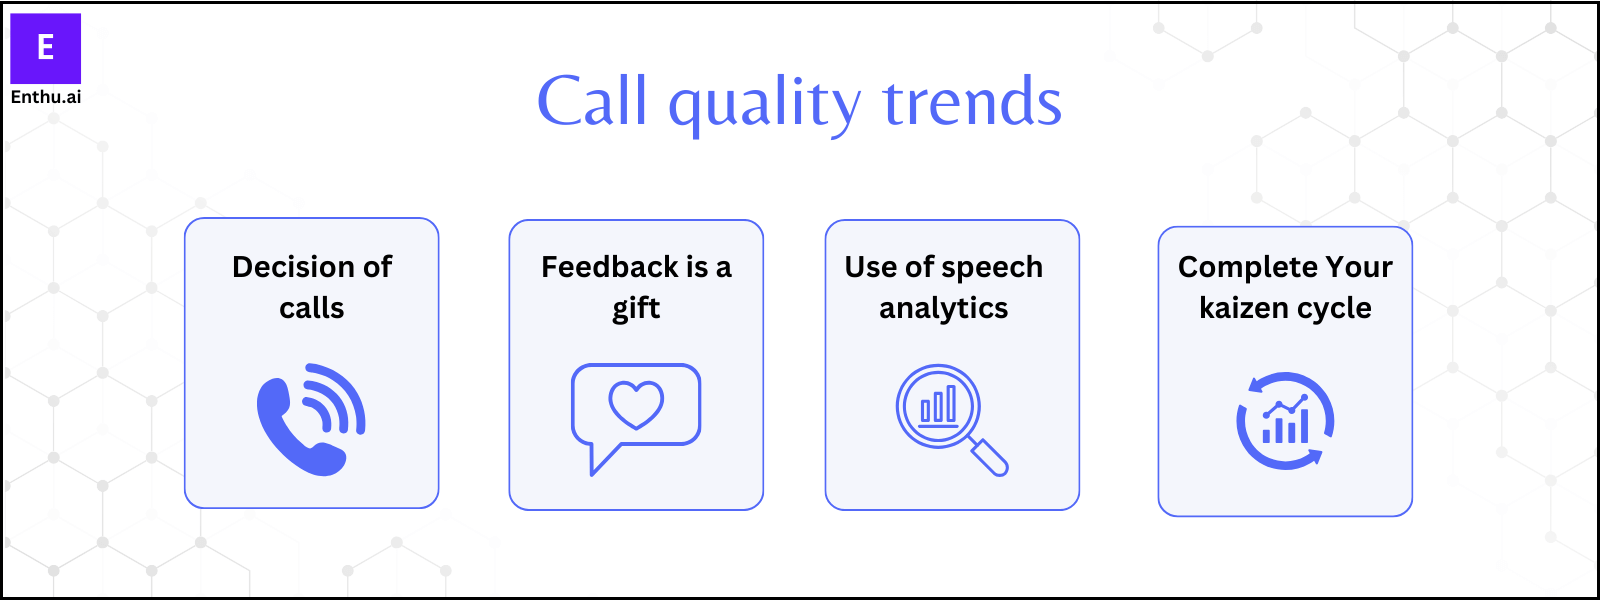 Call quality trends